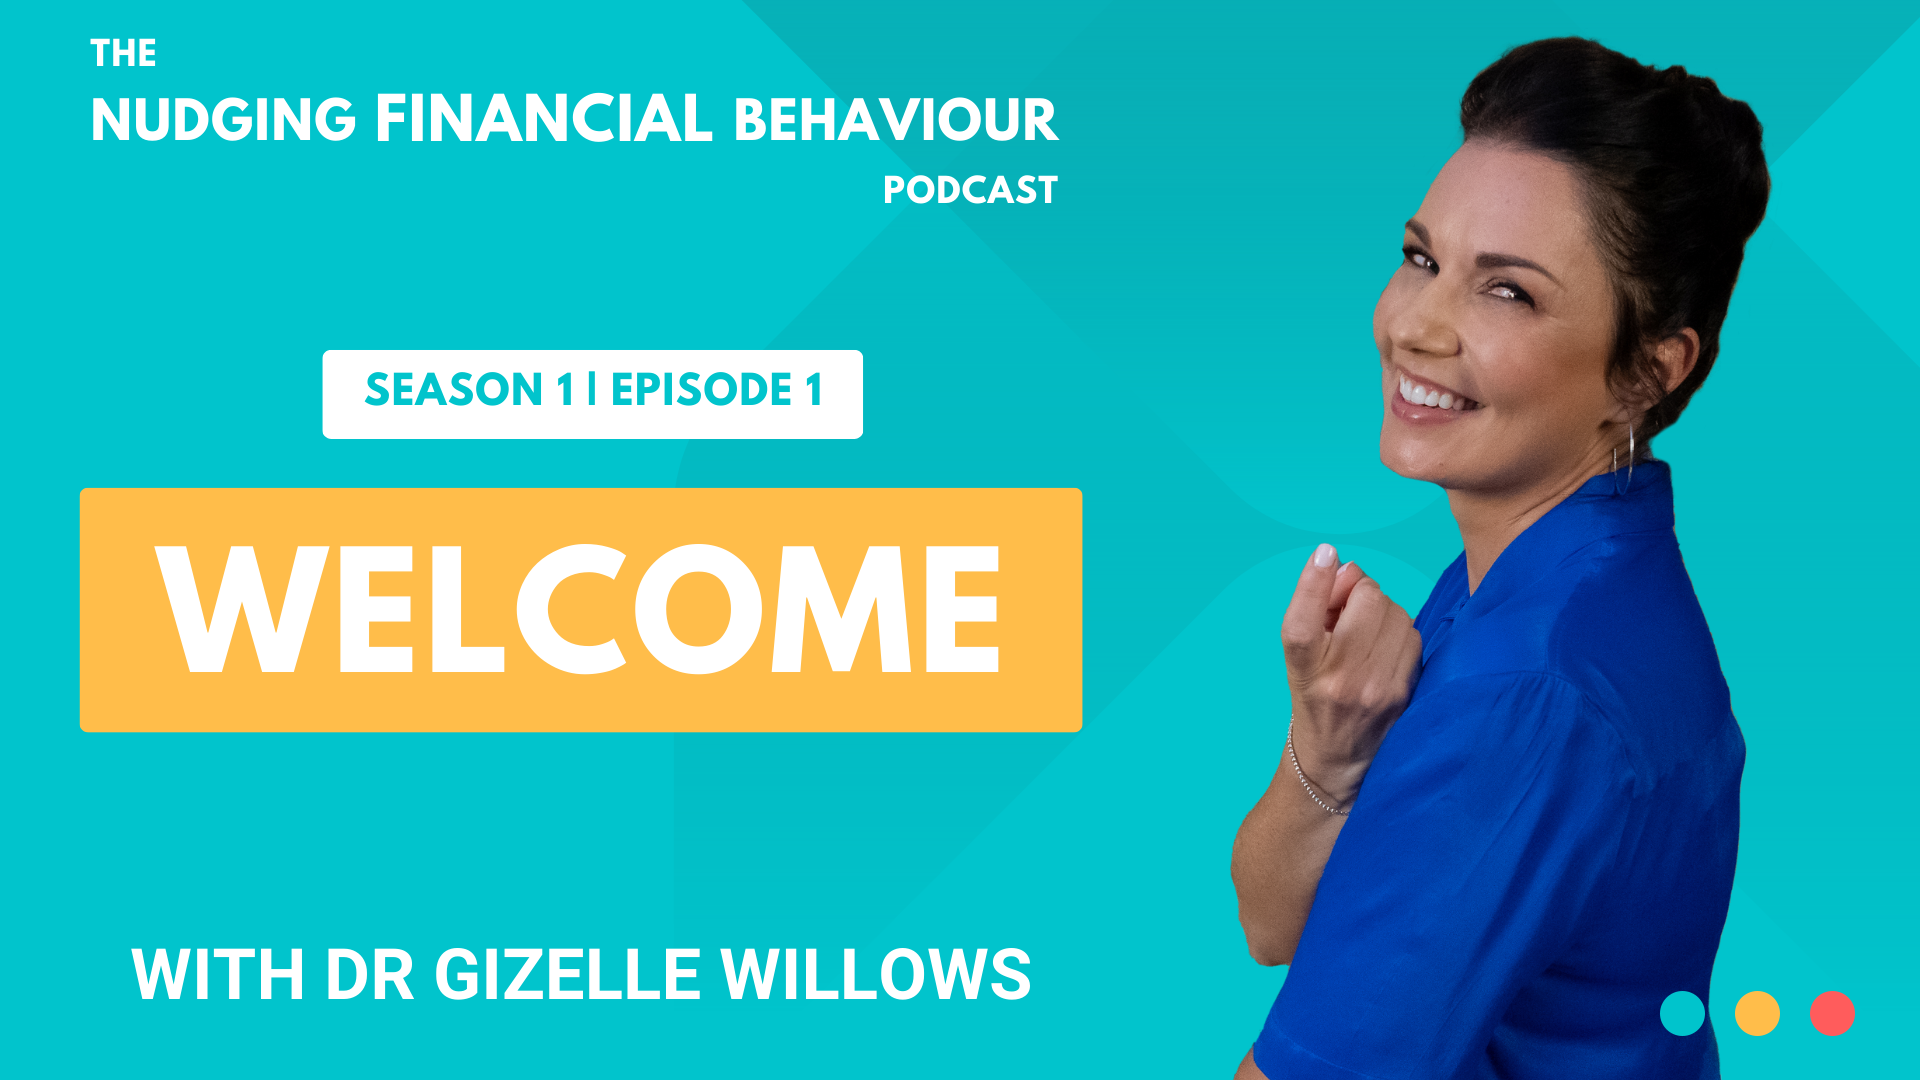 Welcome to the Nudging Financial Behaviour podcast